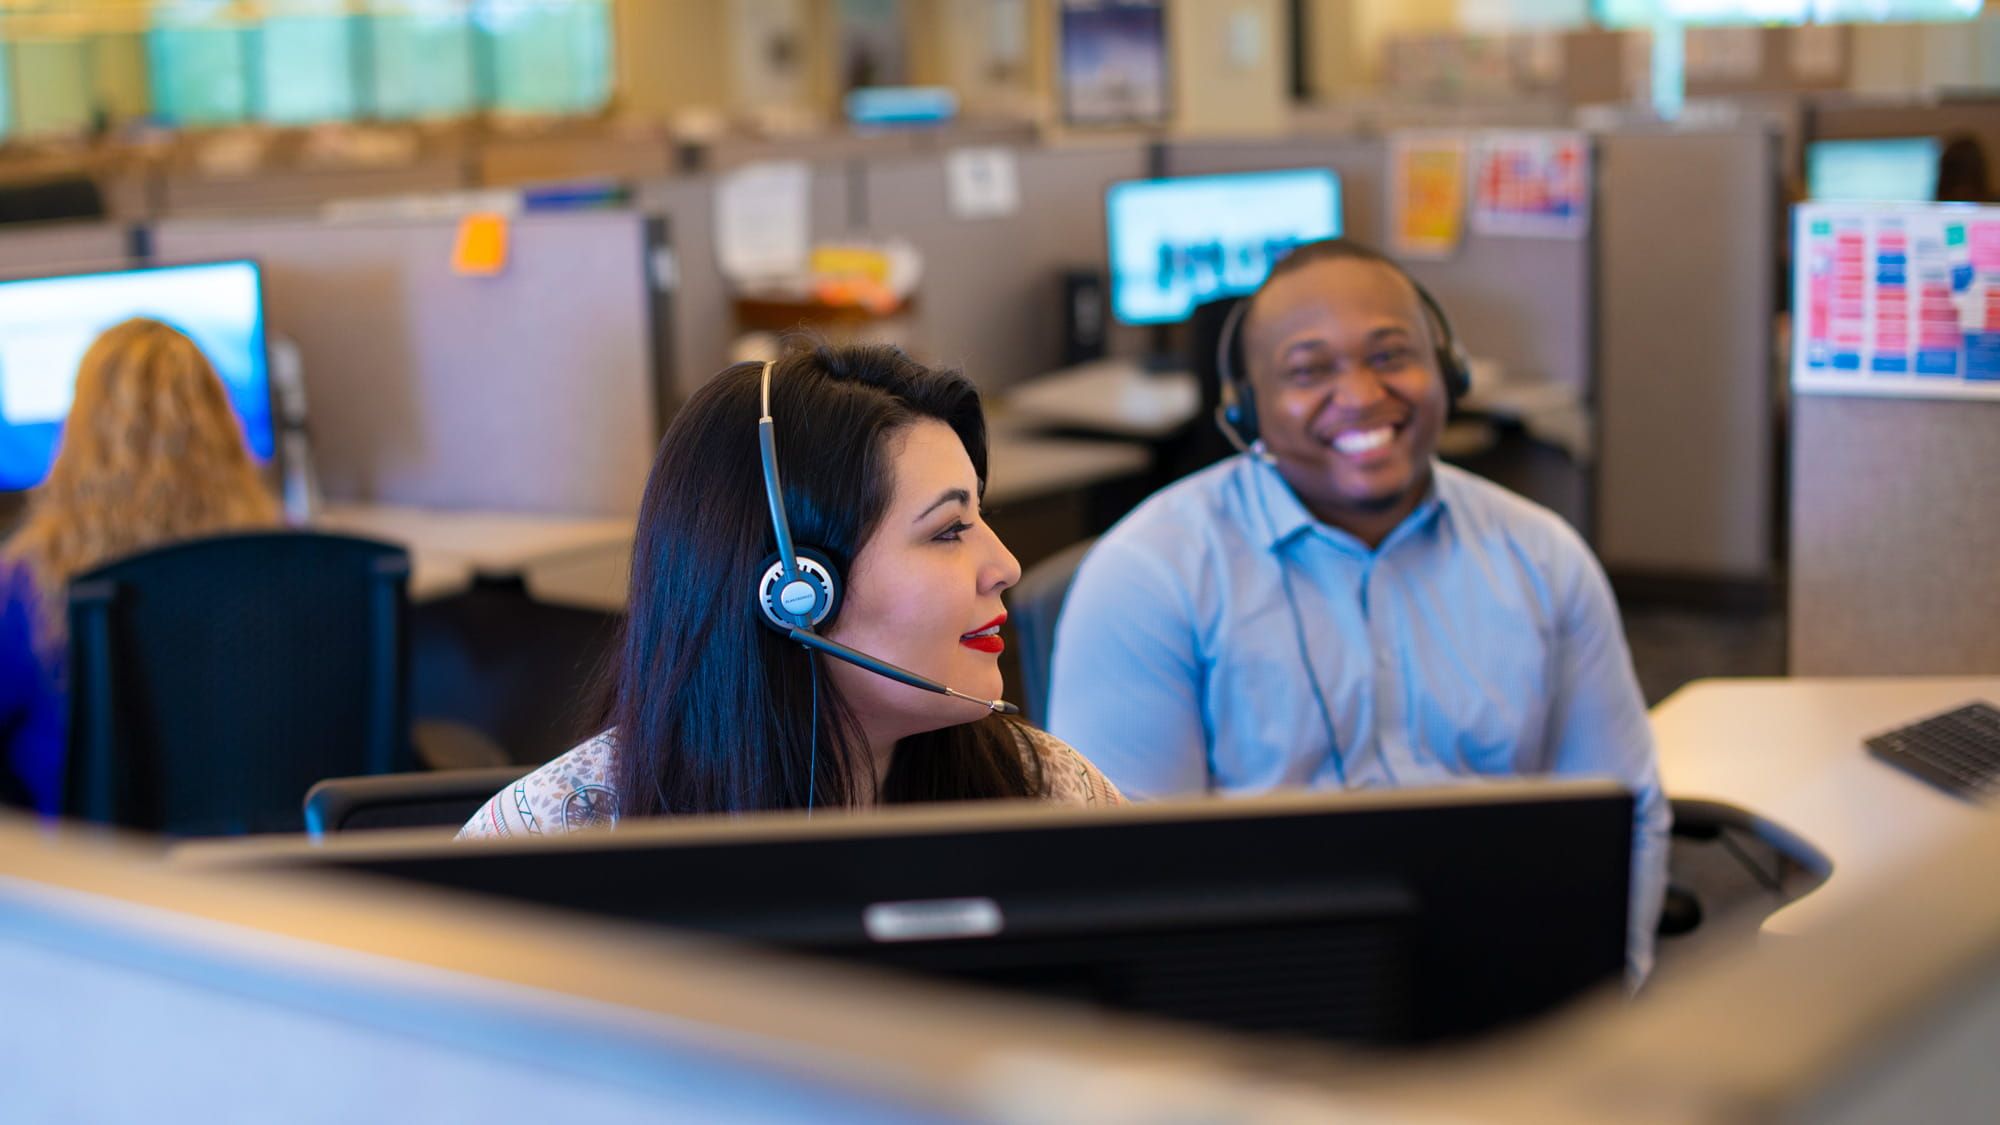 a woman wearing a headset and smiling at a man